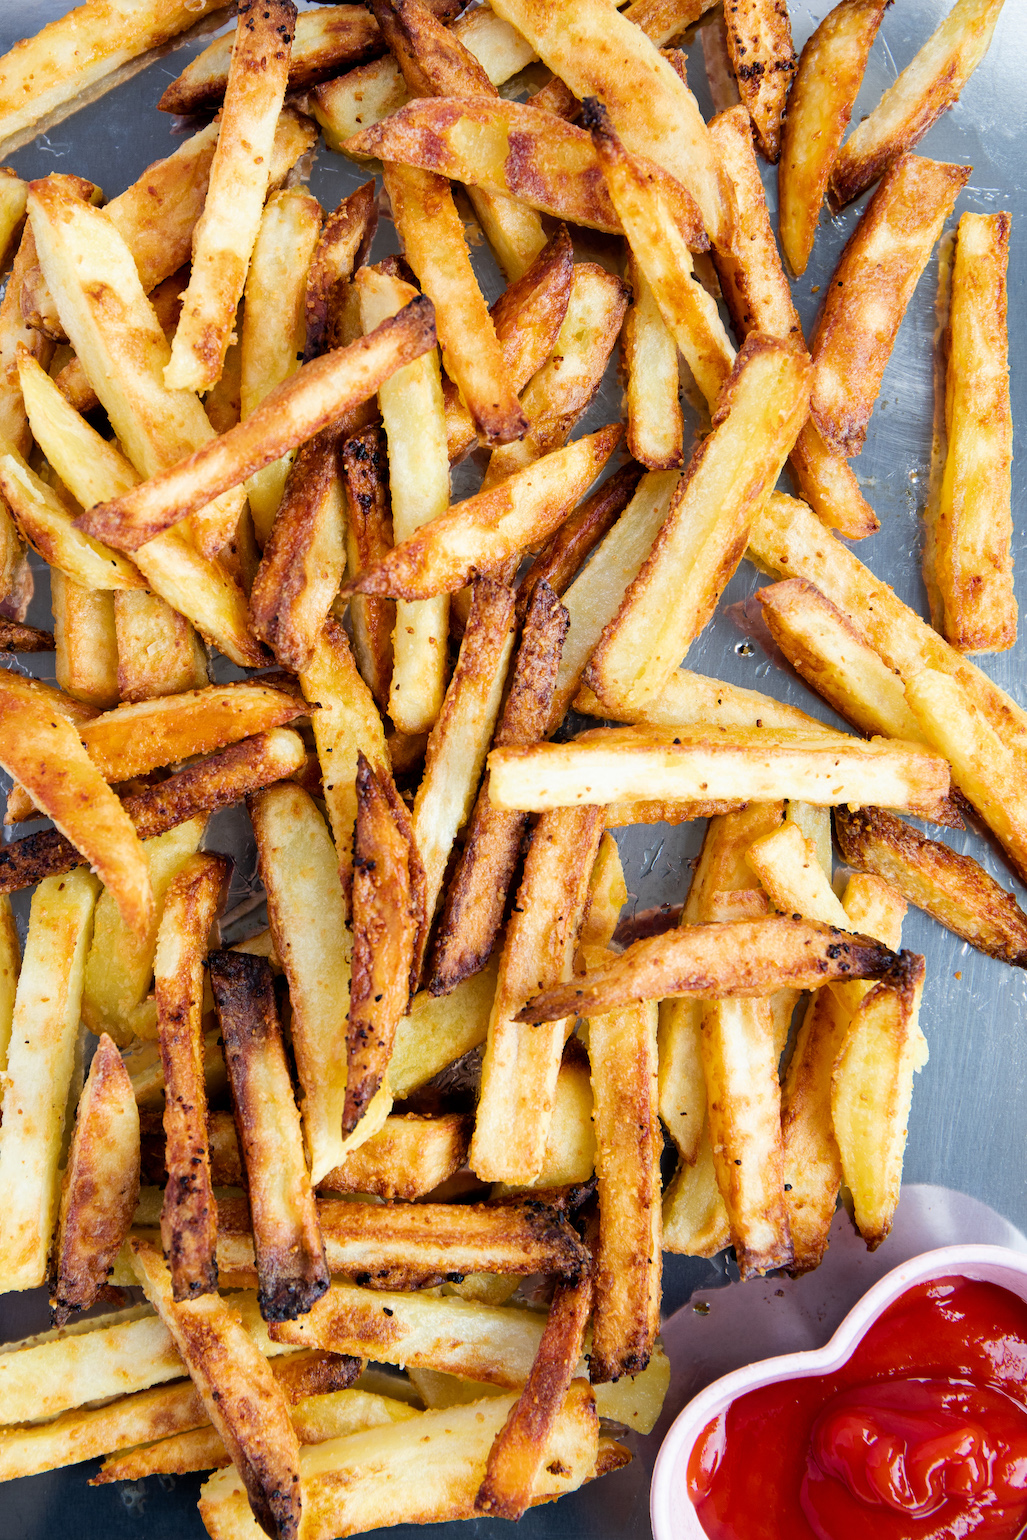 homemade French fries